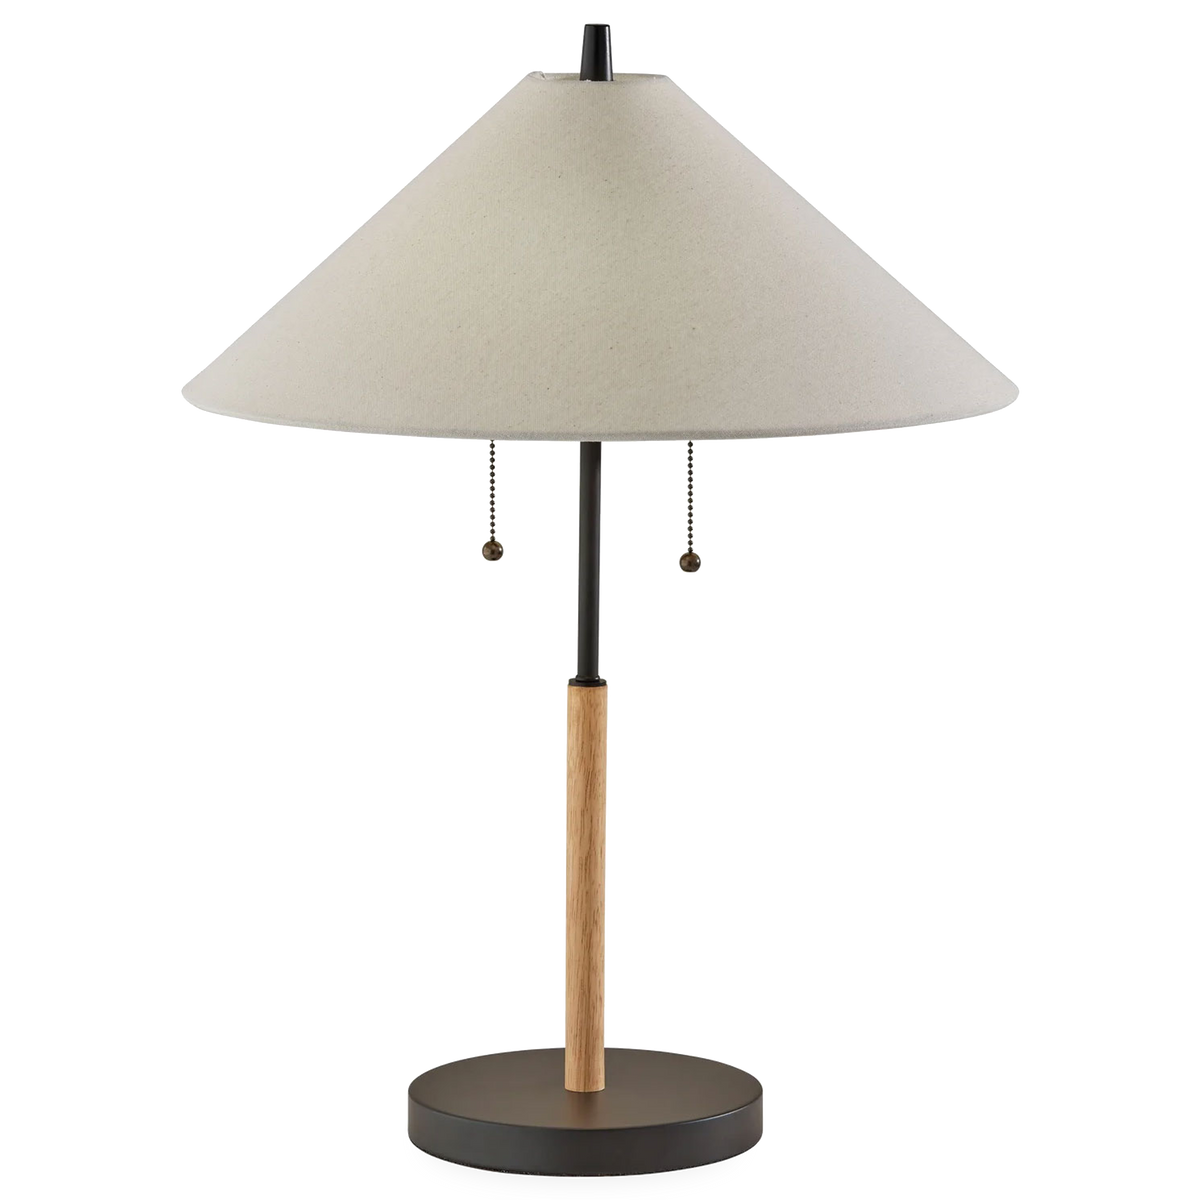 With its relaxed look and charm the Edie Table Lamp makes a statement in any room.